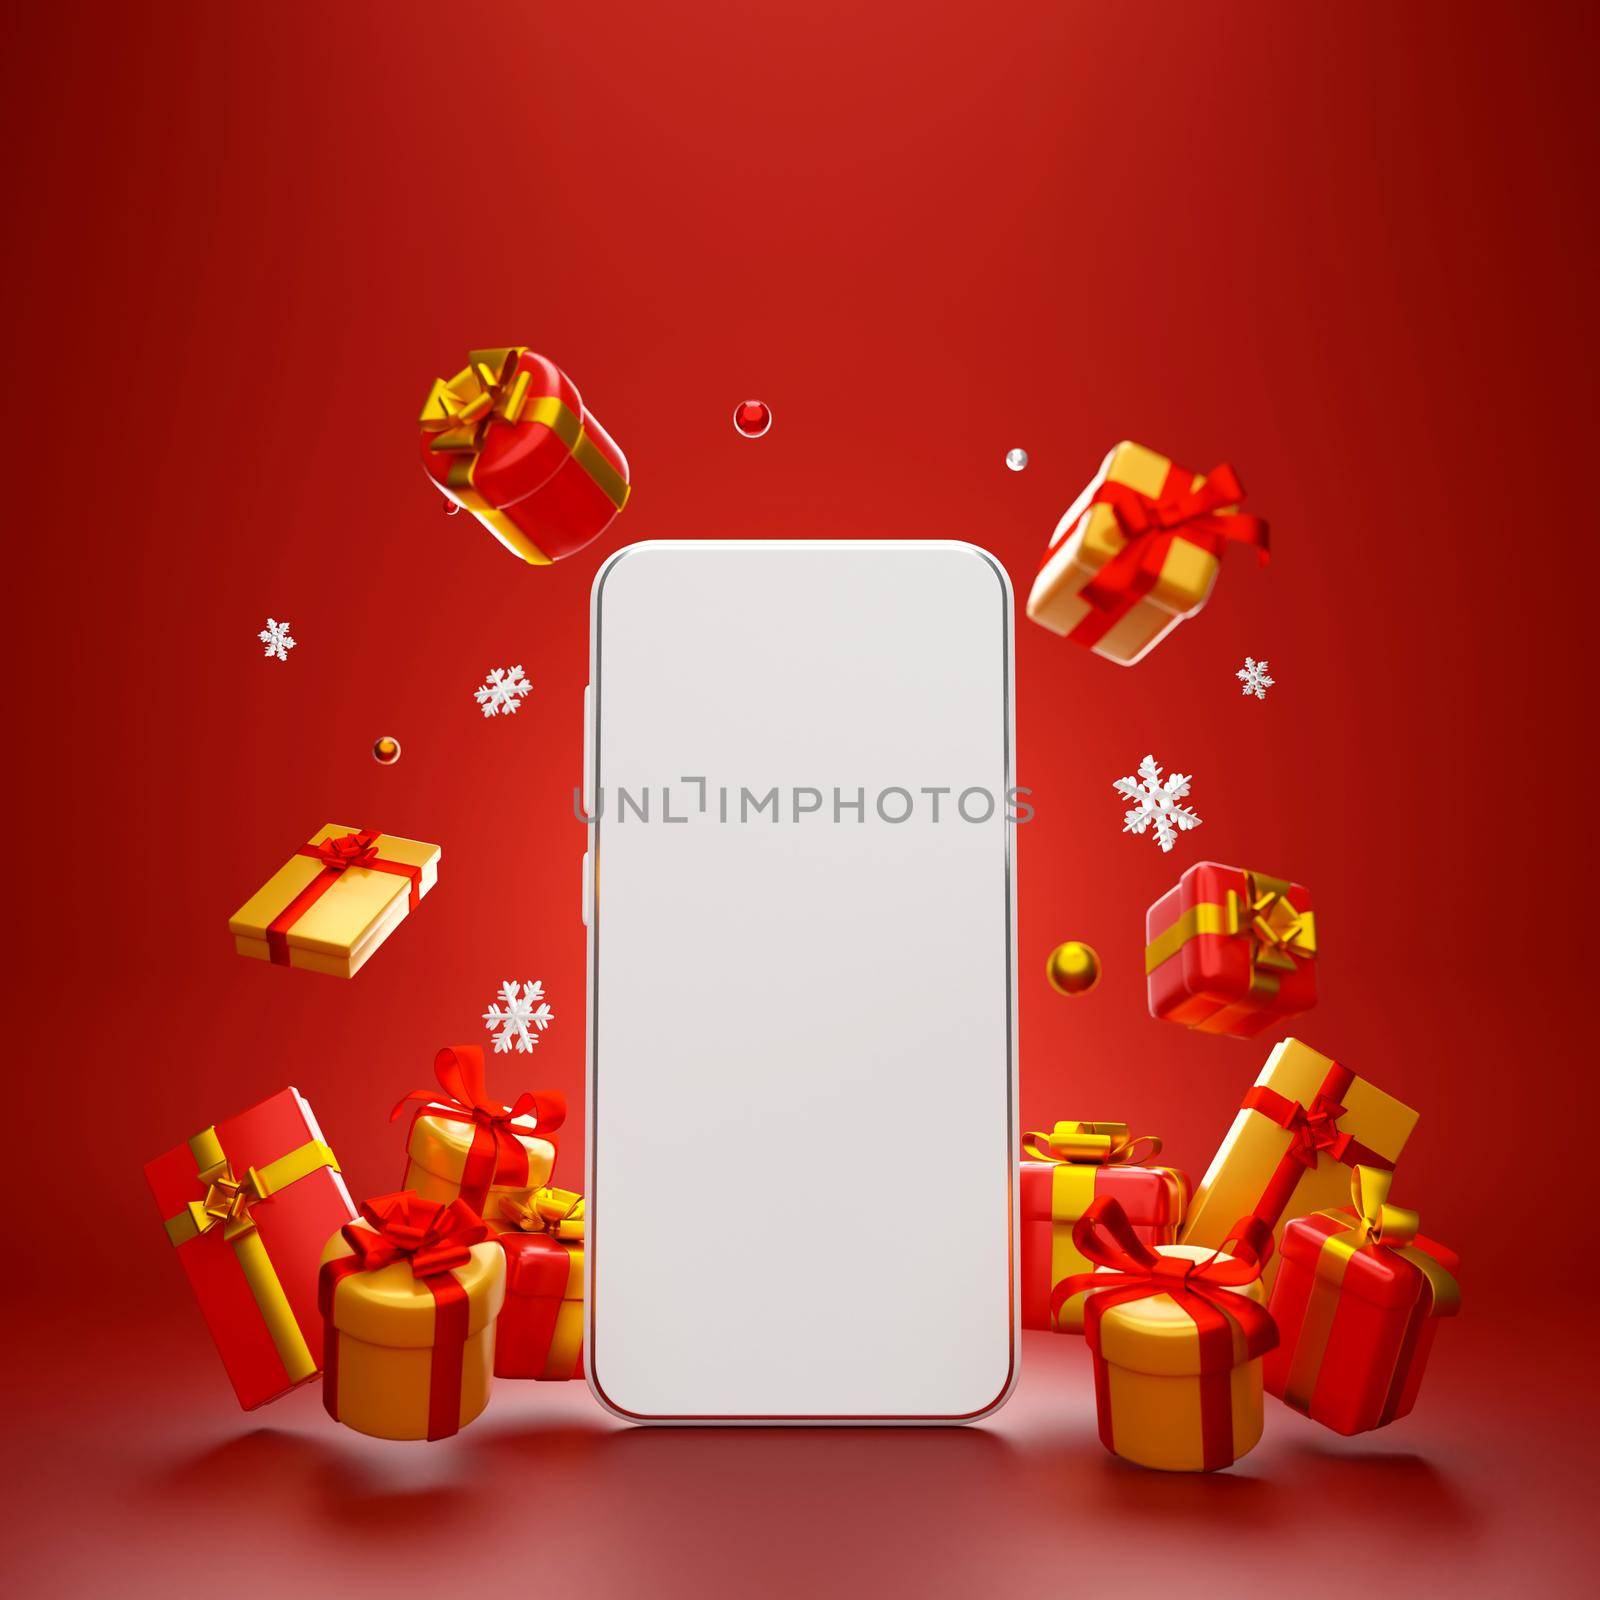 Scene of Smartphone with Christmas gift for shopping online advertisement, 3d illustration by nutzchotwarut